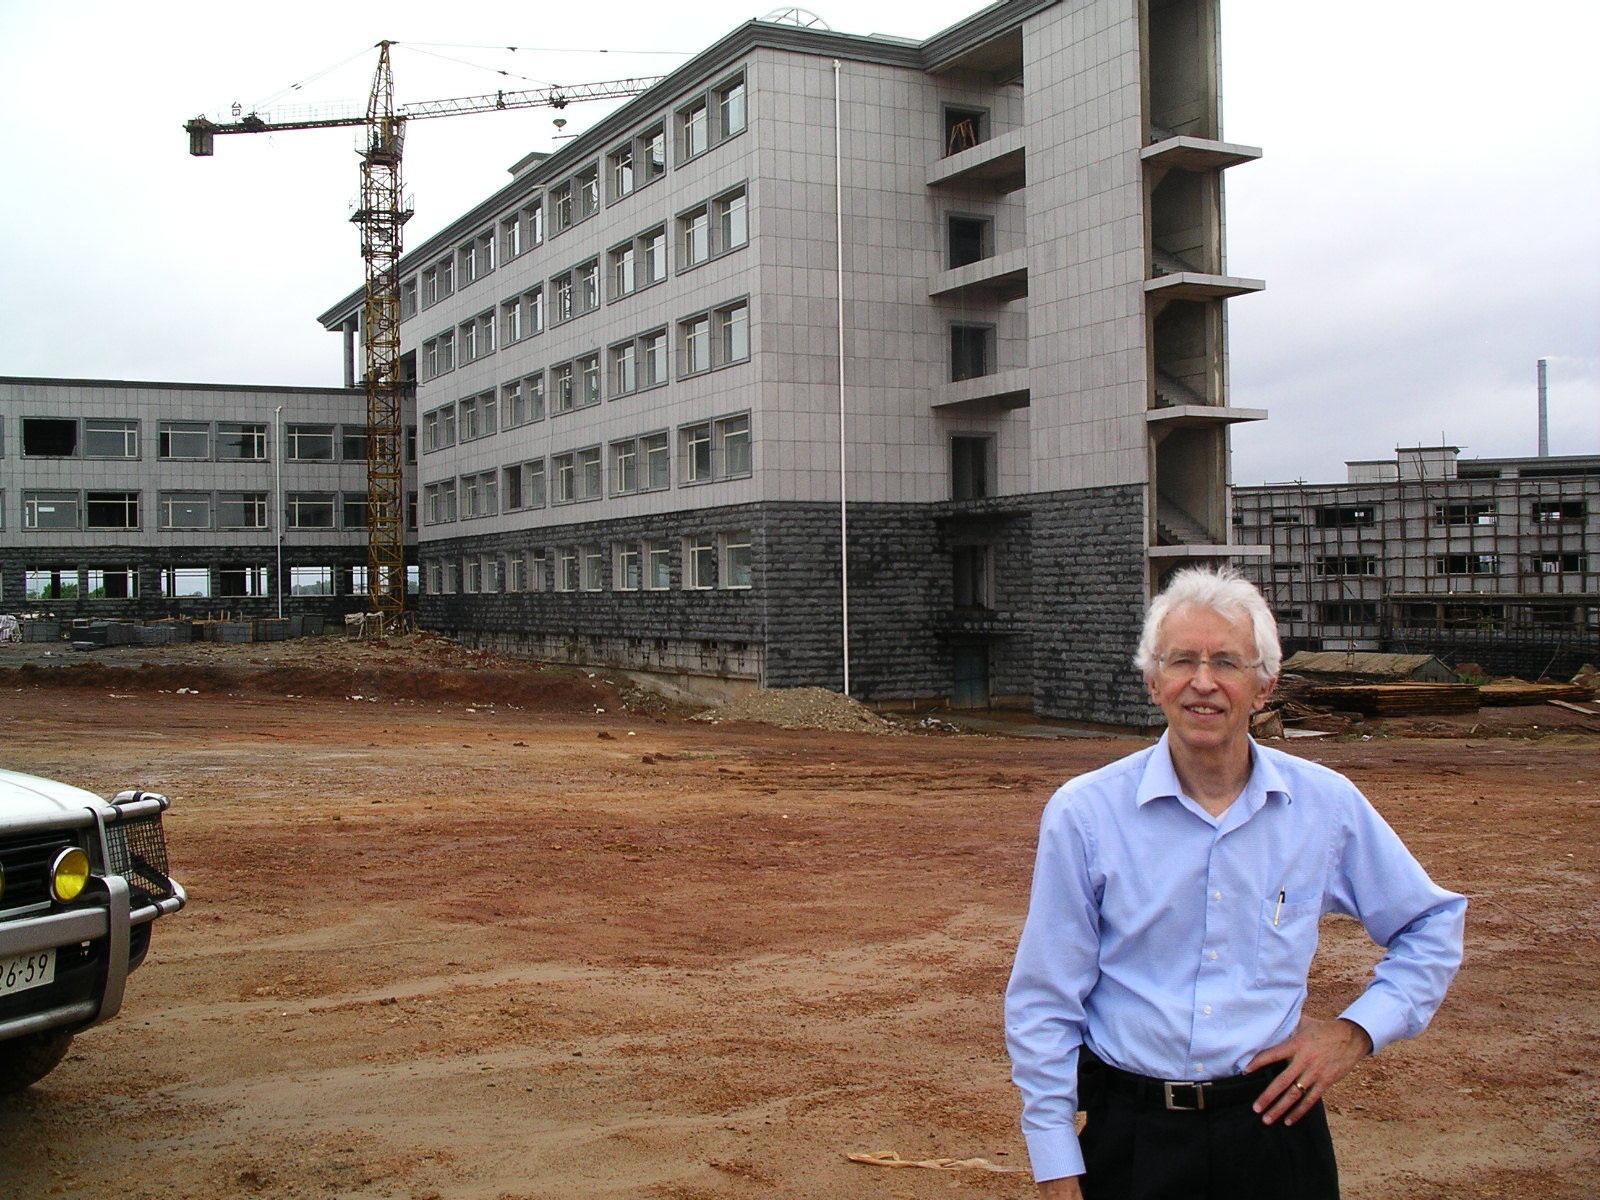 Hecker in blue shirt posing at an empty construction site with a building being constructed at the background